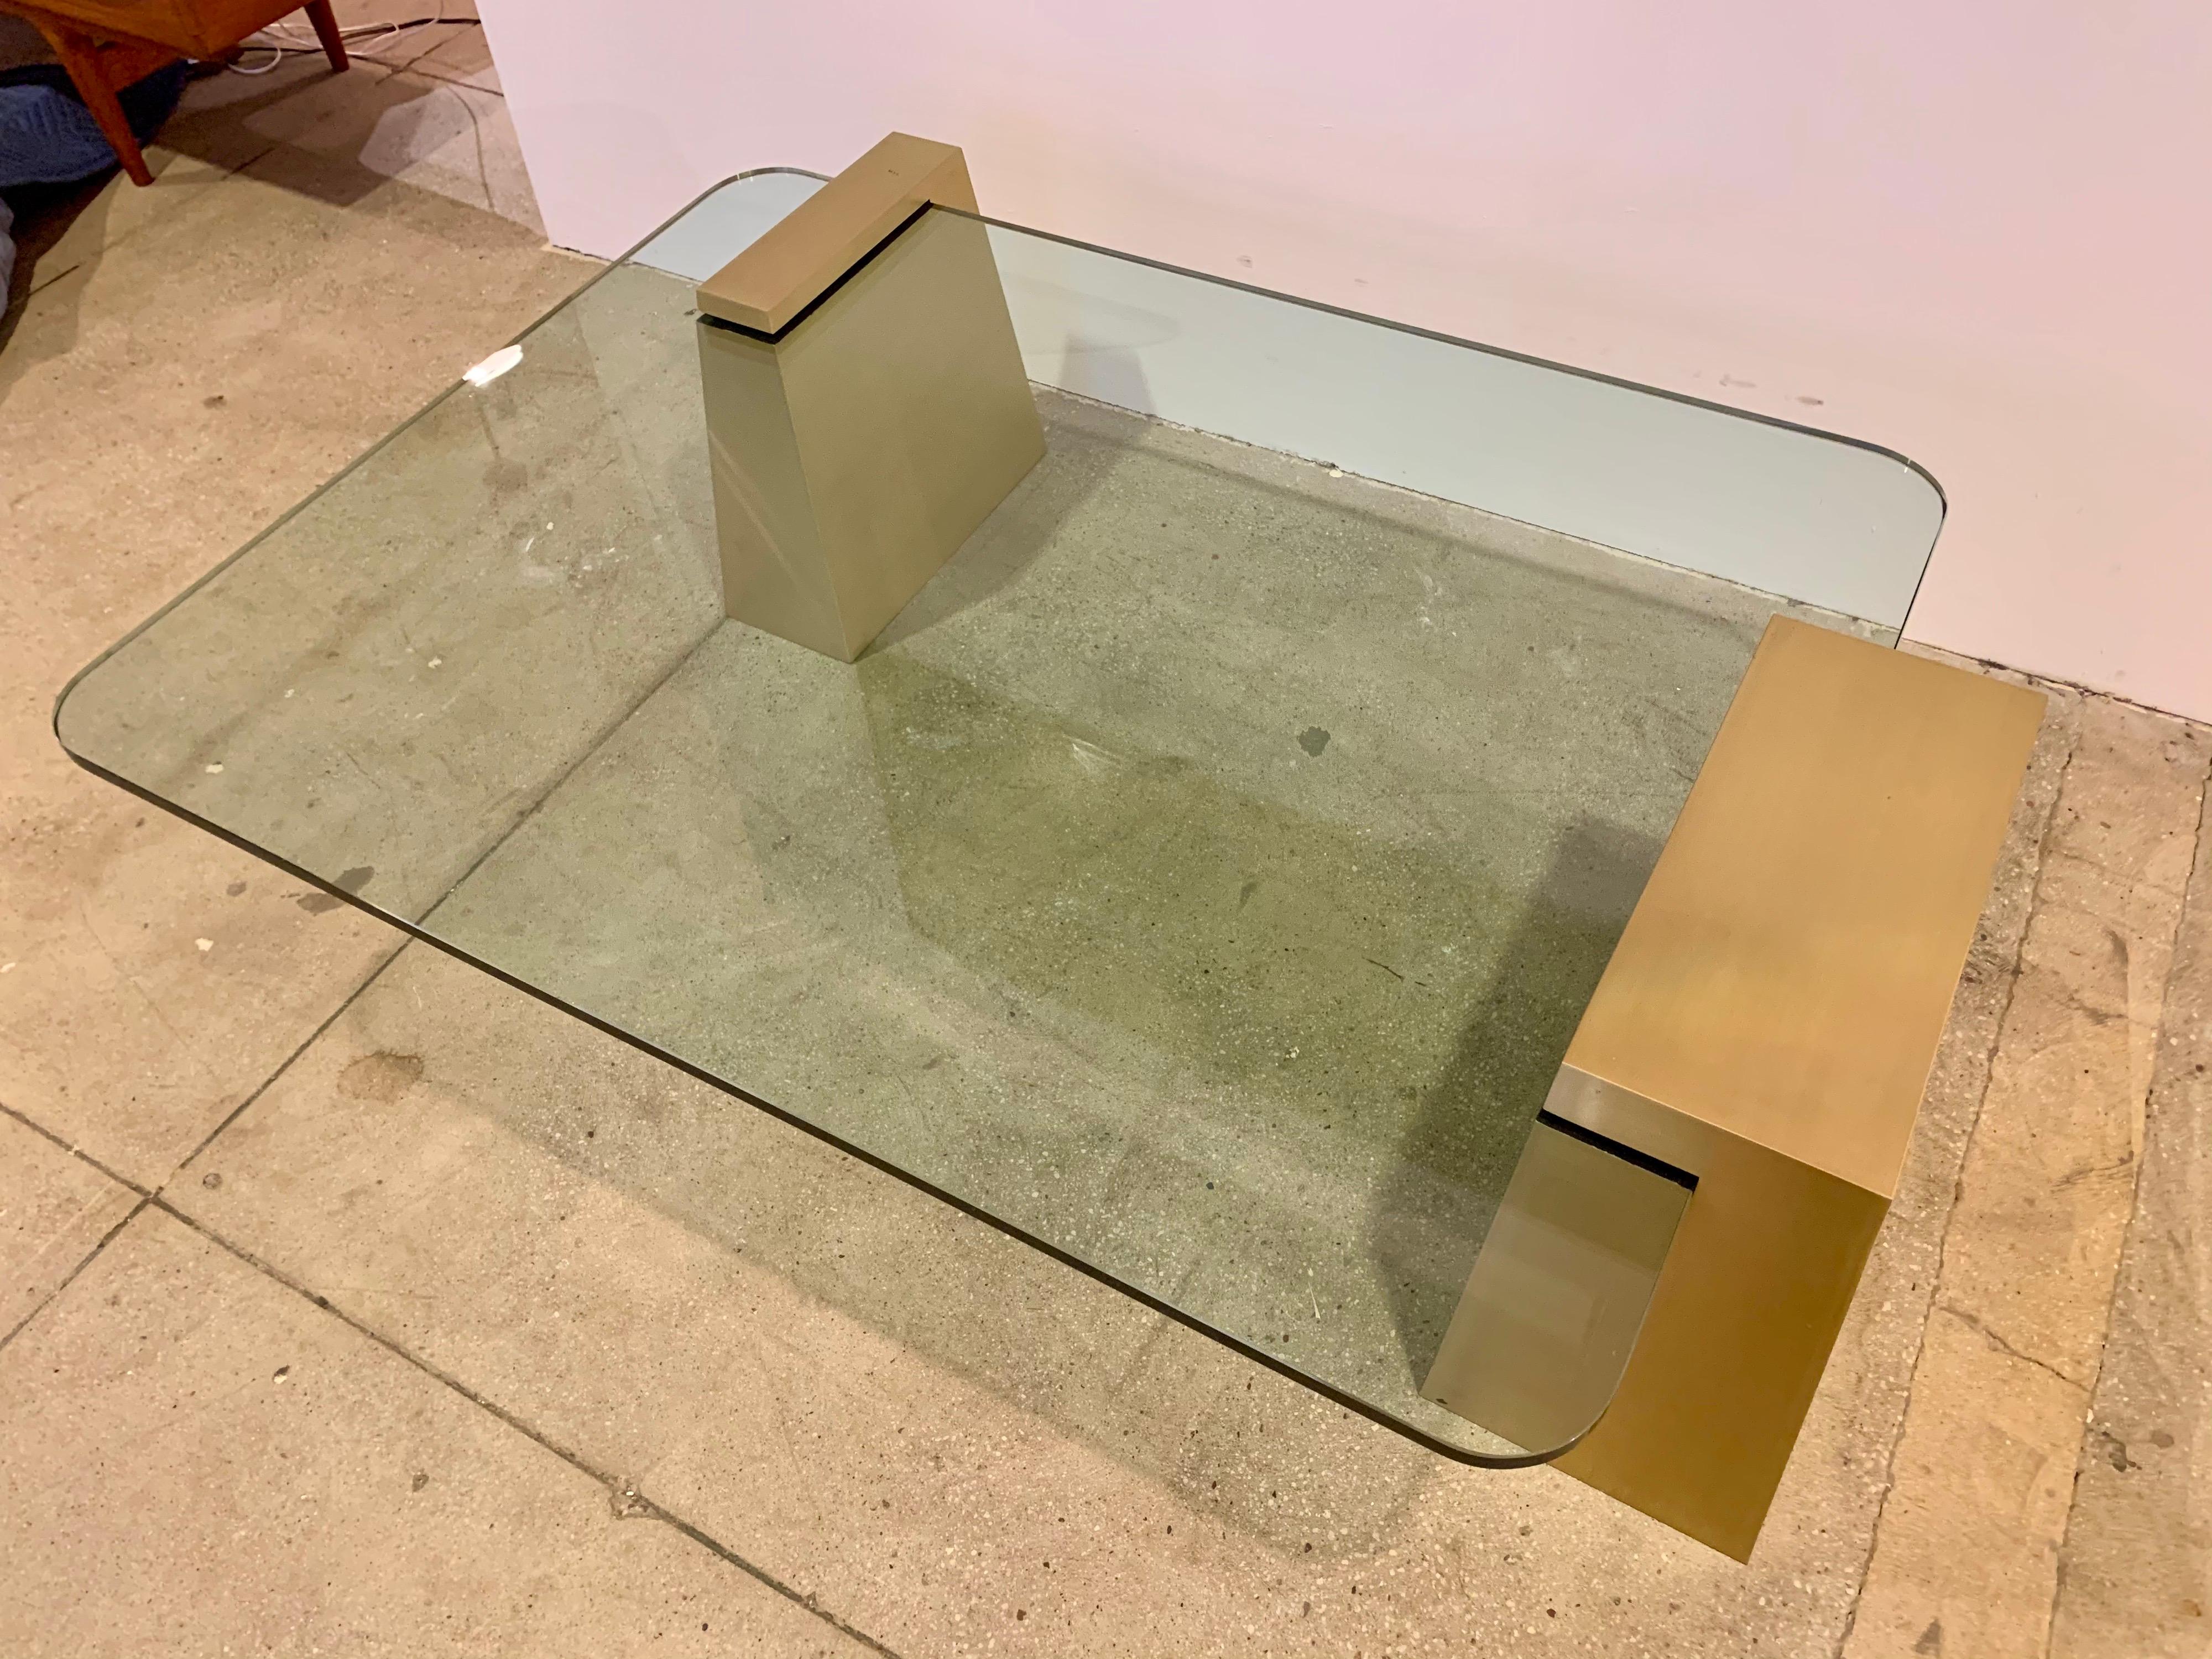 An original modern and sleek 1980s Lorin Marsh designed cocktail table composed of 1” thick rectangular glass top and aged satin brass bases. The bases can be arranged on different sides of the glass and can be used with different shaped glass.